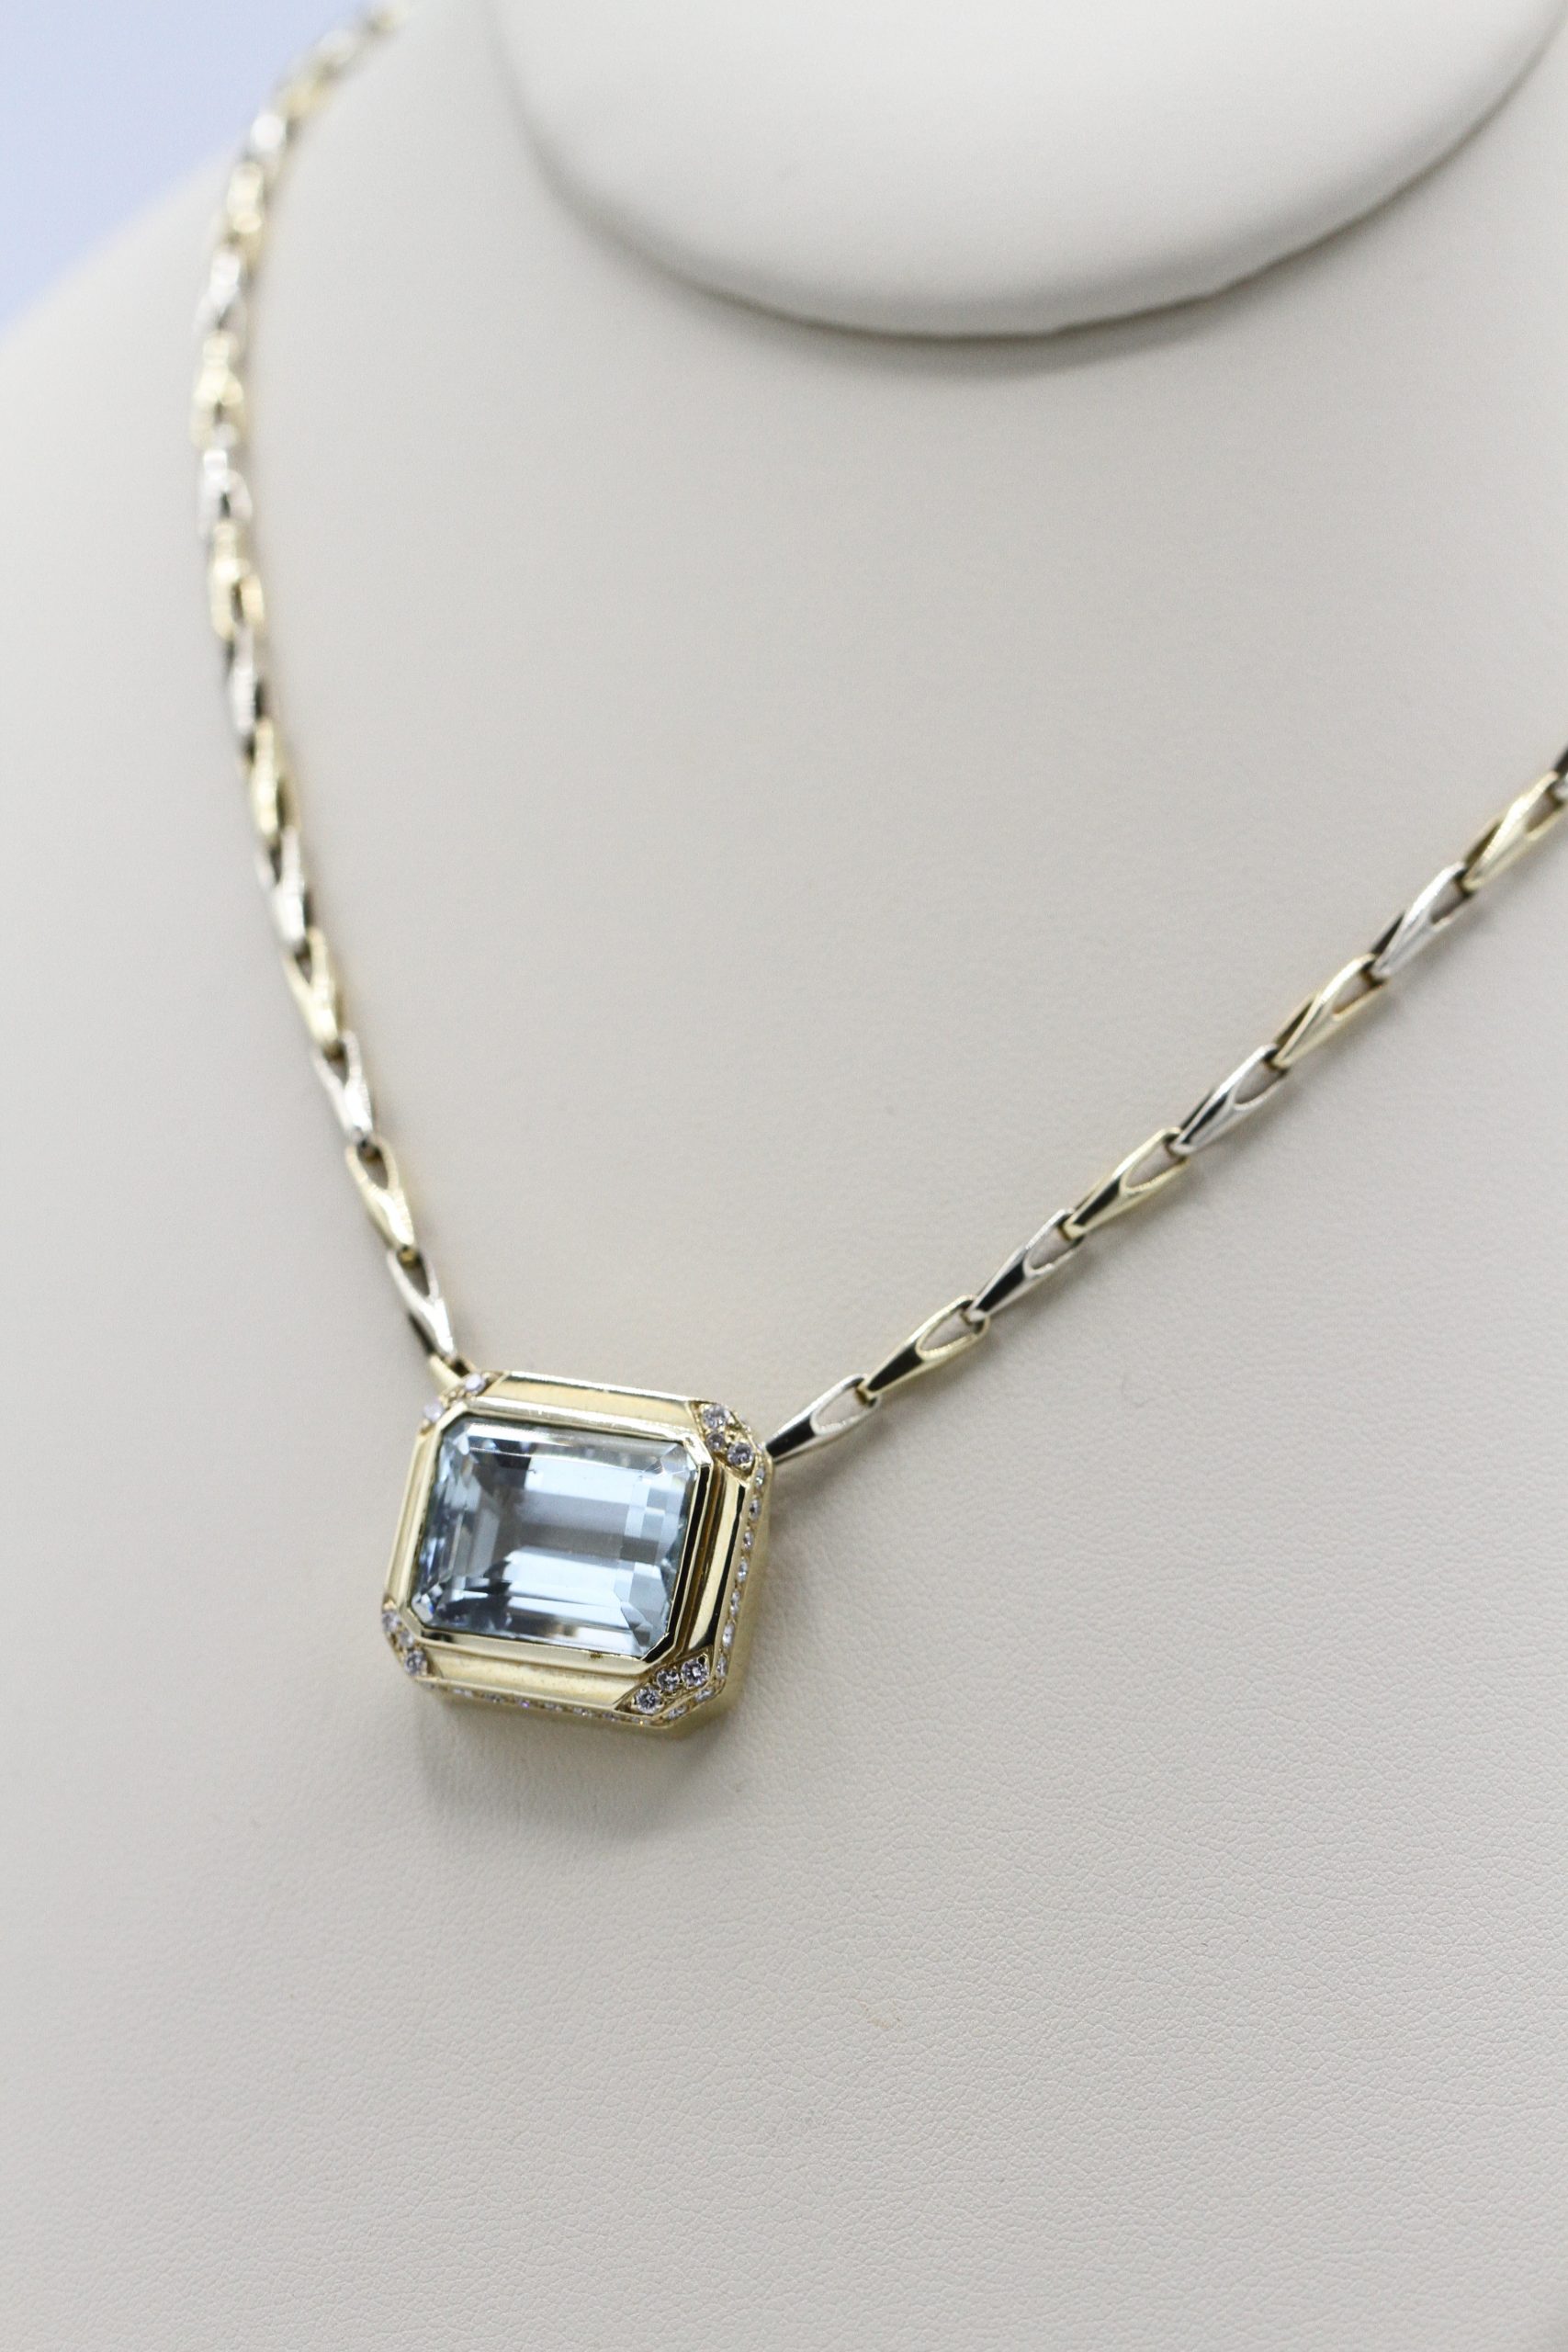 A necklace with a large, square large centerpiece